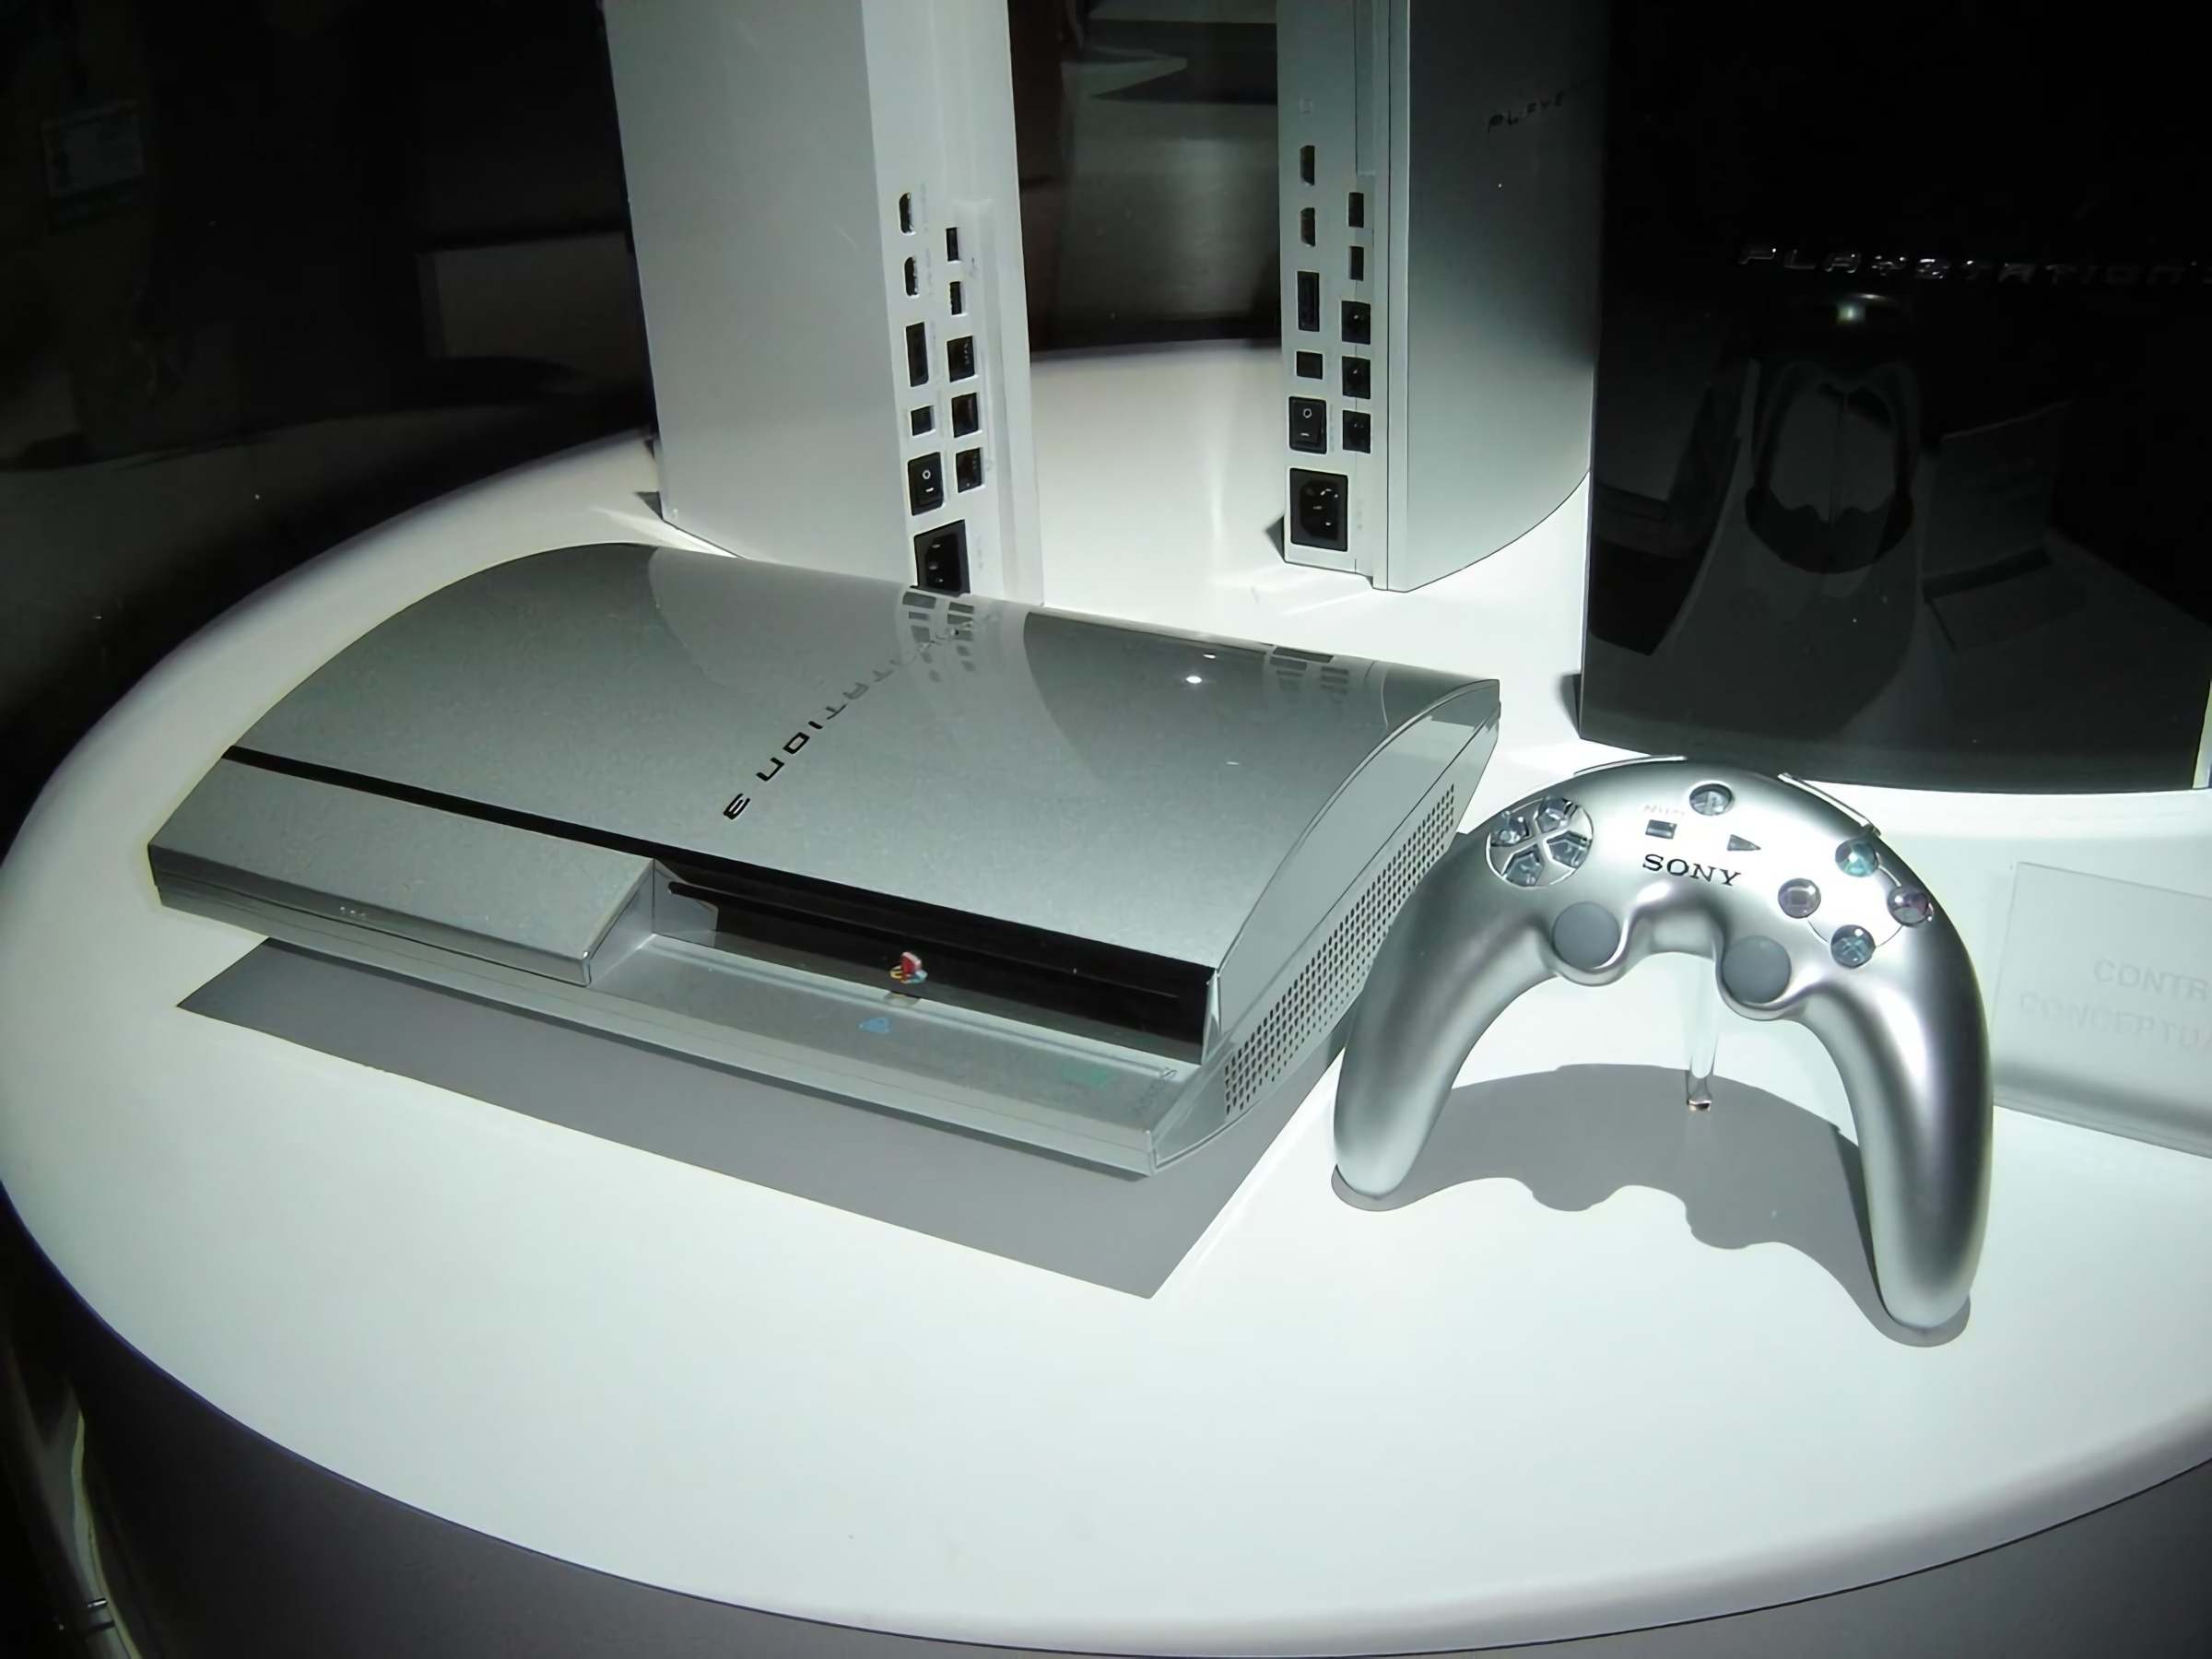 Sony playstation ремонтundefined. Sony ps3 Silver. PLAYSTATION 3 Console Prototype. Sony ps1 DEVKIT. Ps3 контроллер Бумеранг.